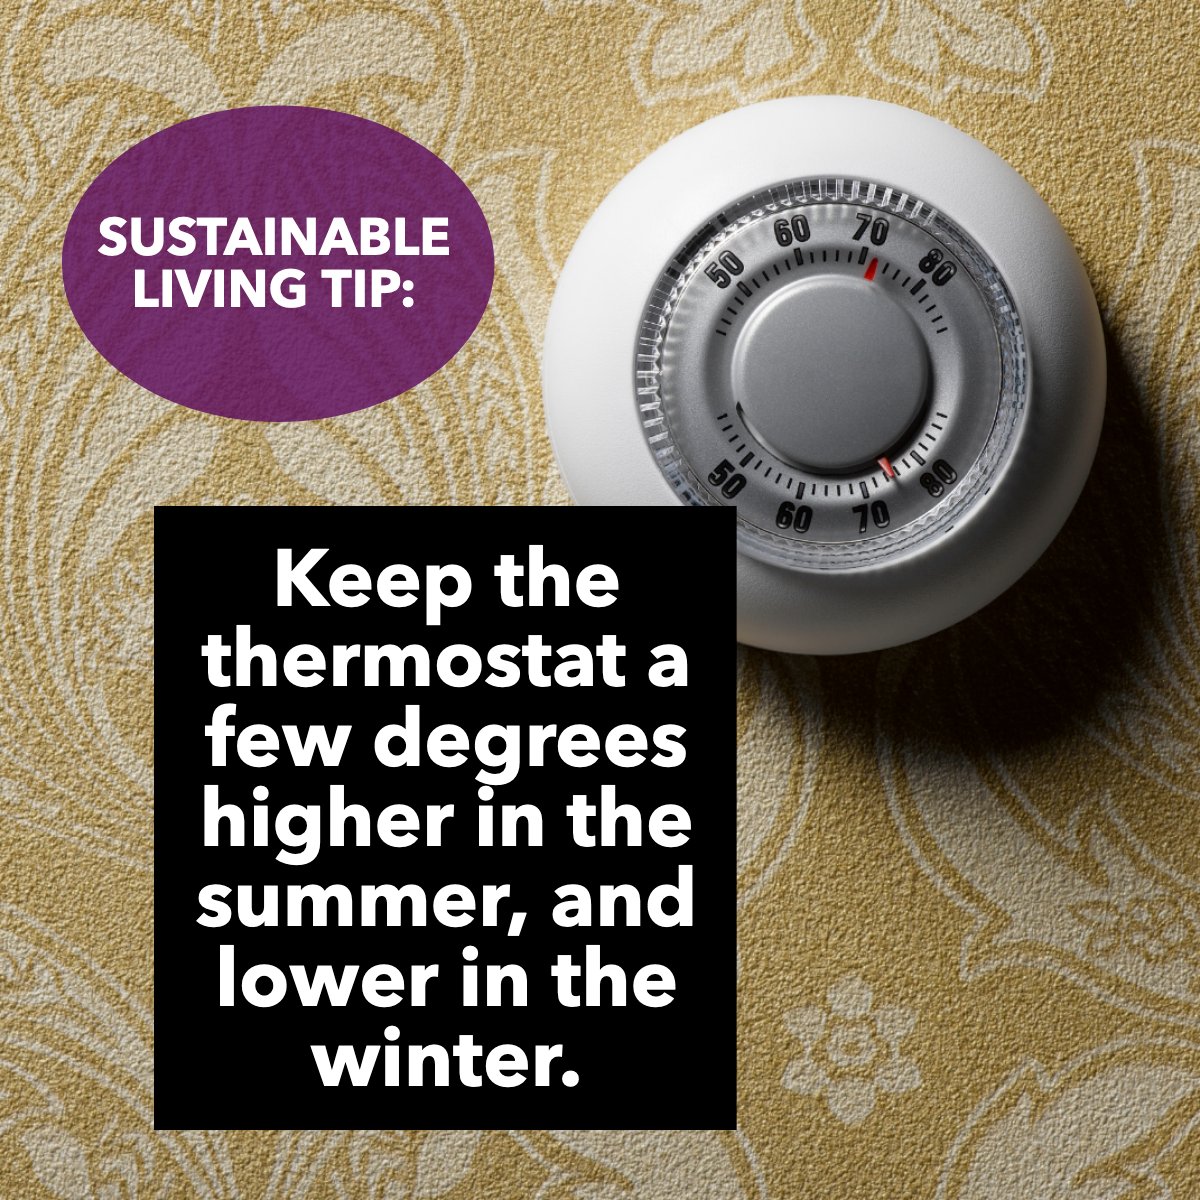 Here is a useful tip! 

Let's try it this and every season! ❄️

#sustainablelifestyle    #sustainable    #sustainablity    #thermostat
#swflrealestate #realestate #capecoral #sanibel #fortmyers #capecoralrealtor